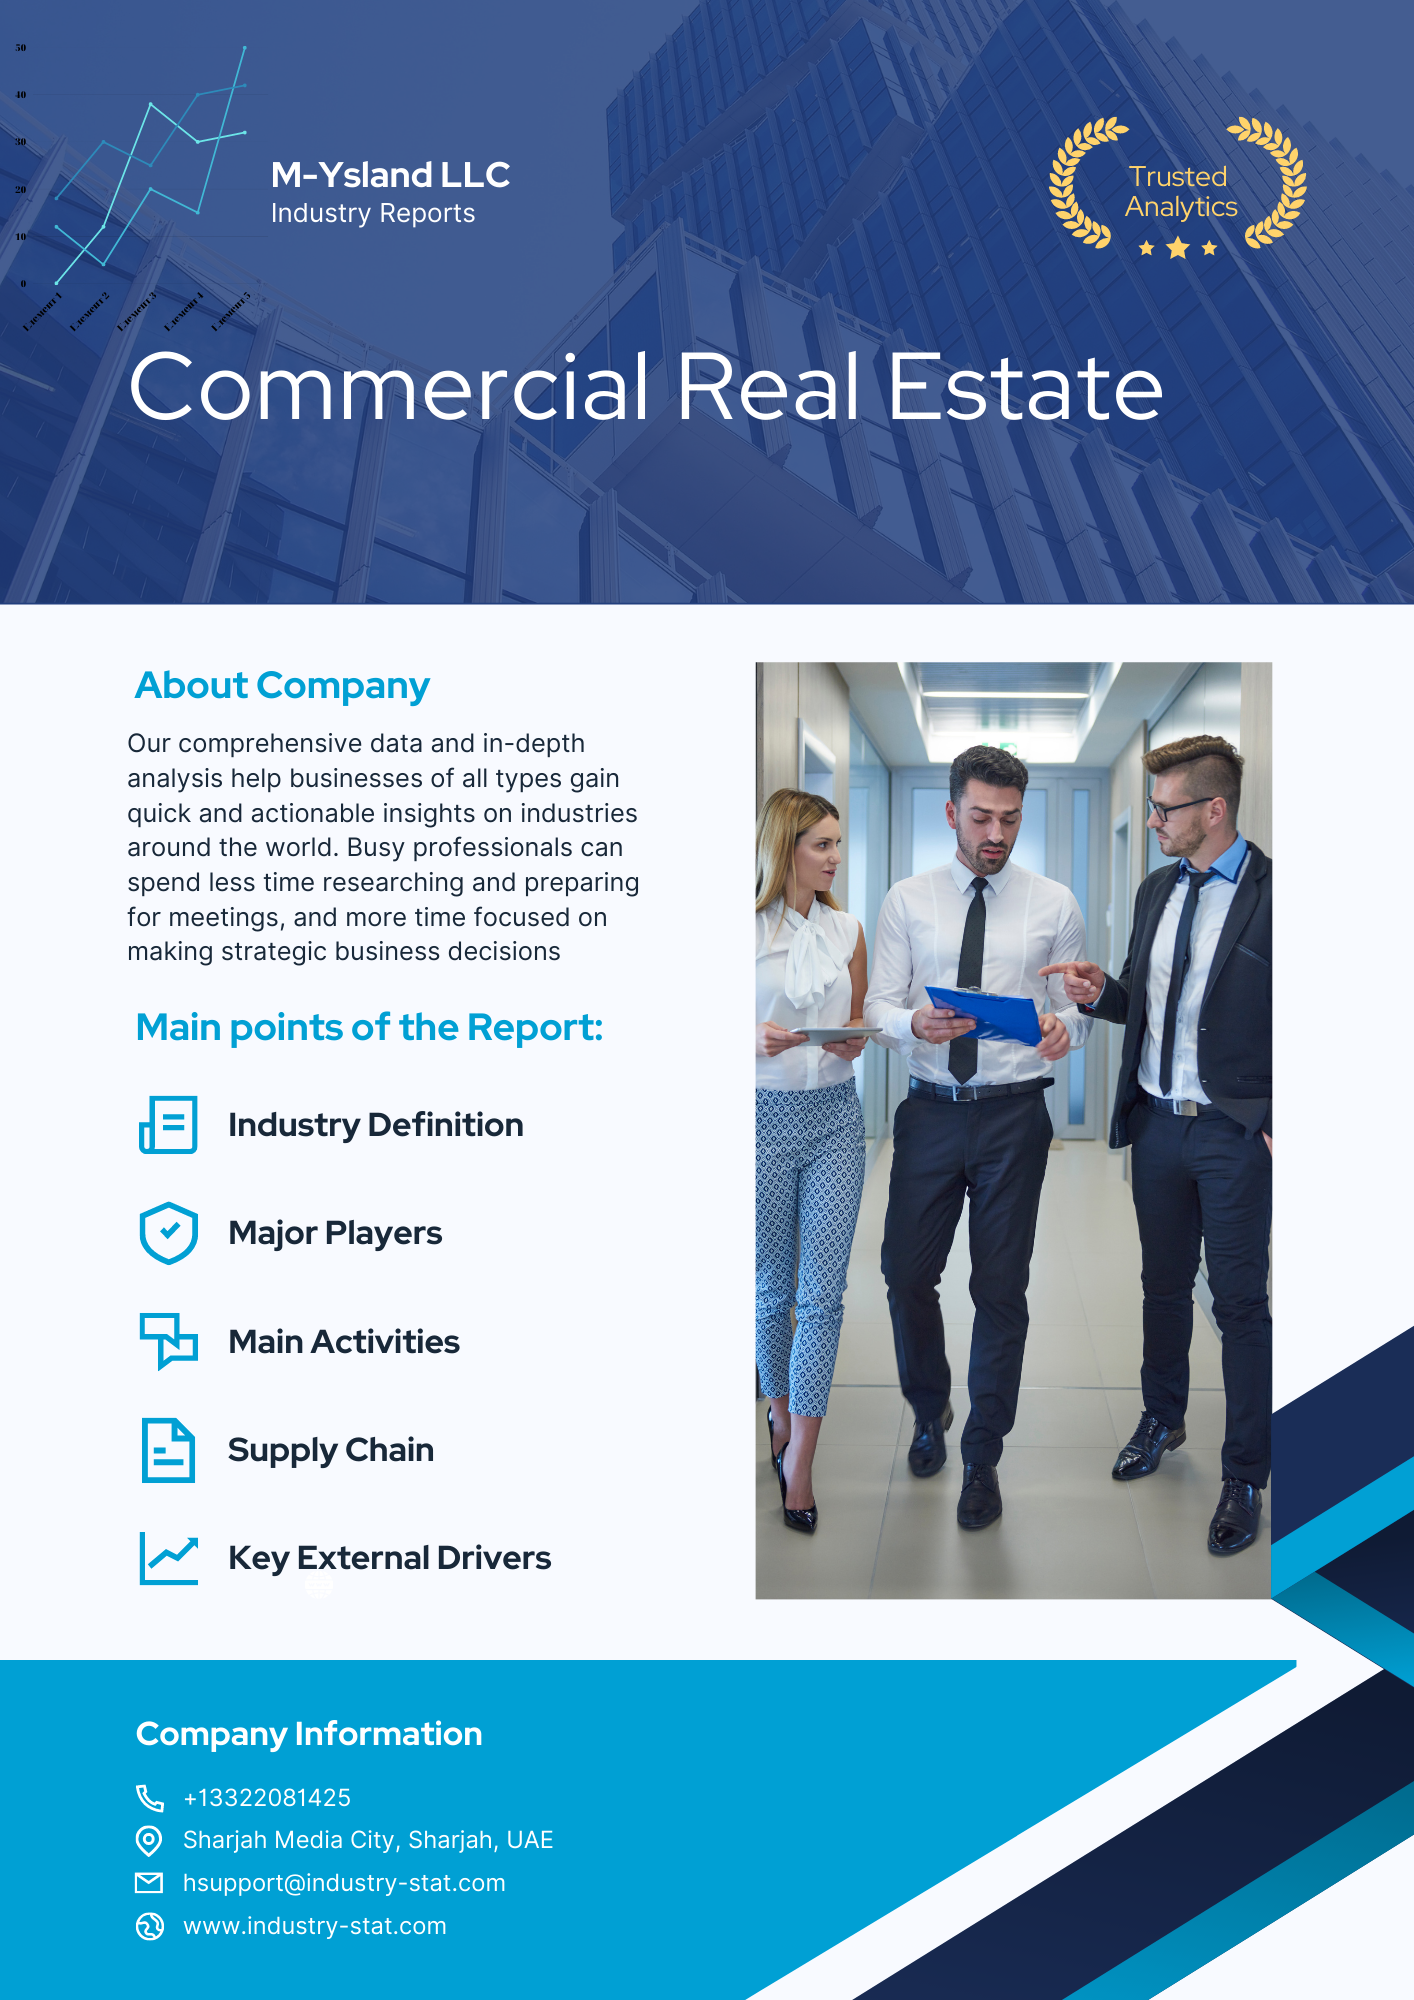 Commercial Real Estate